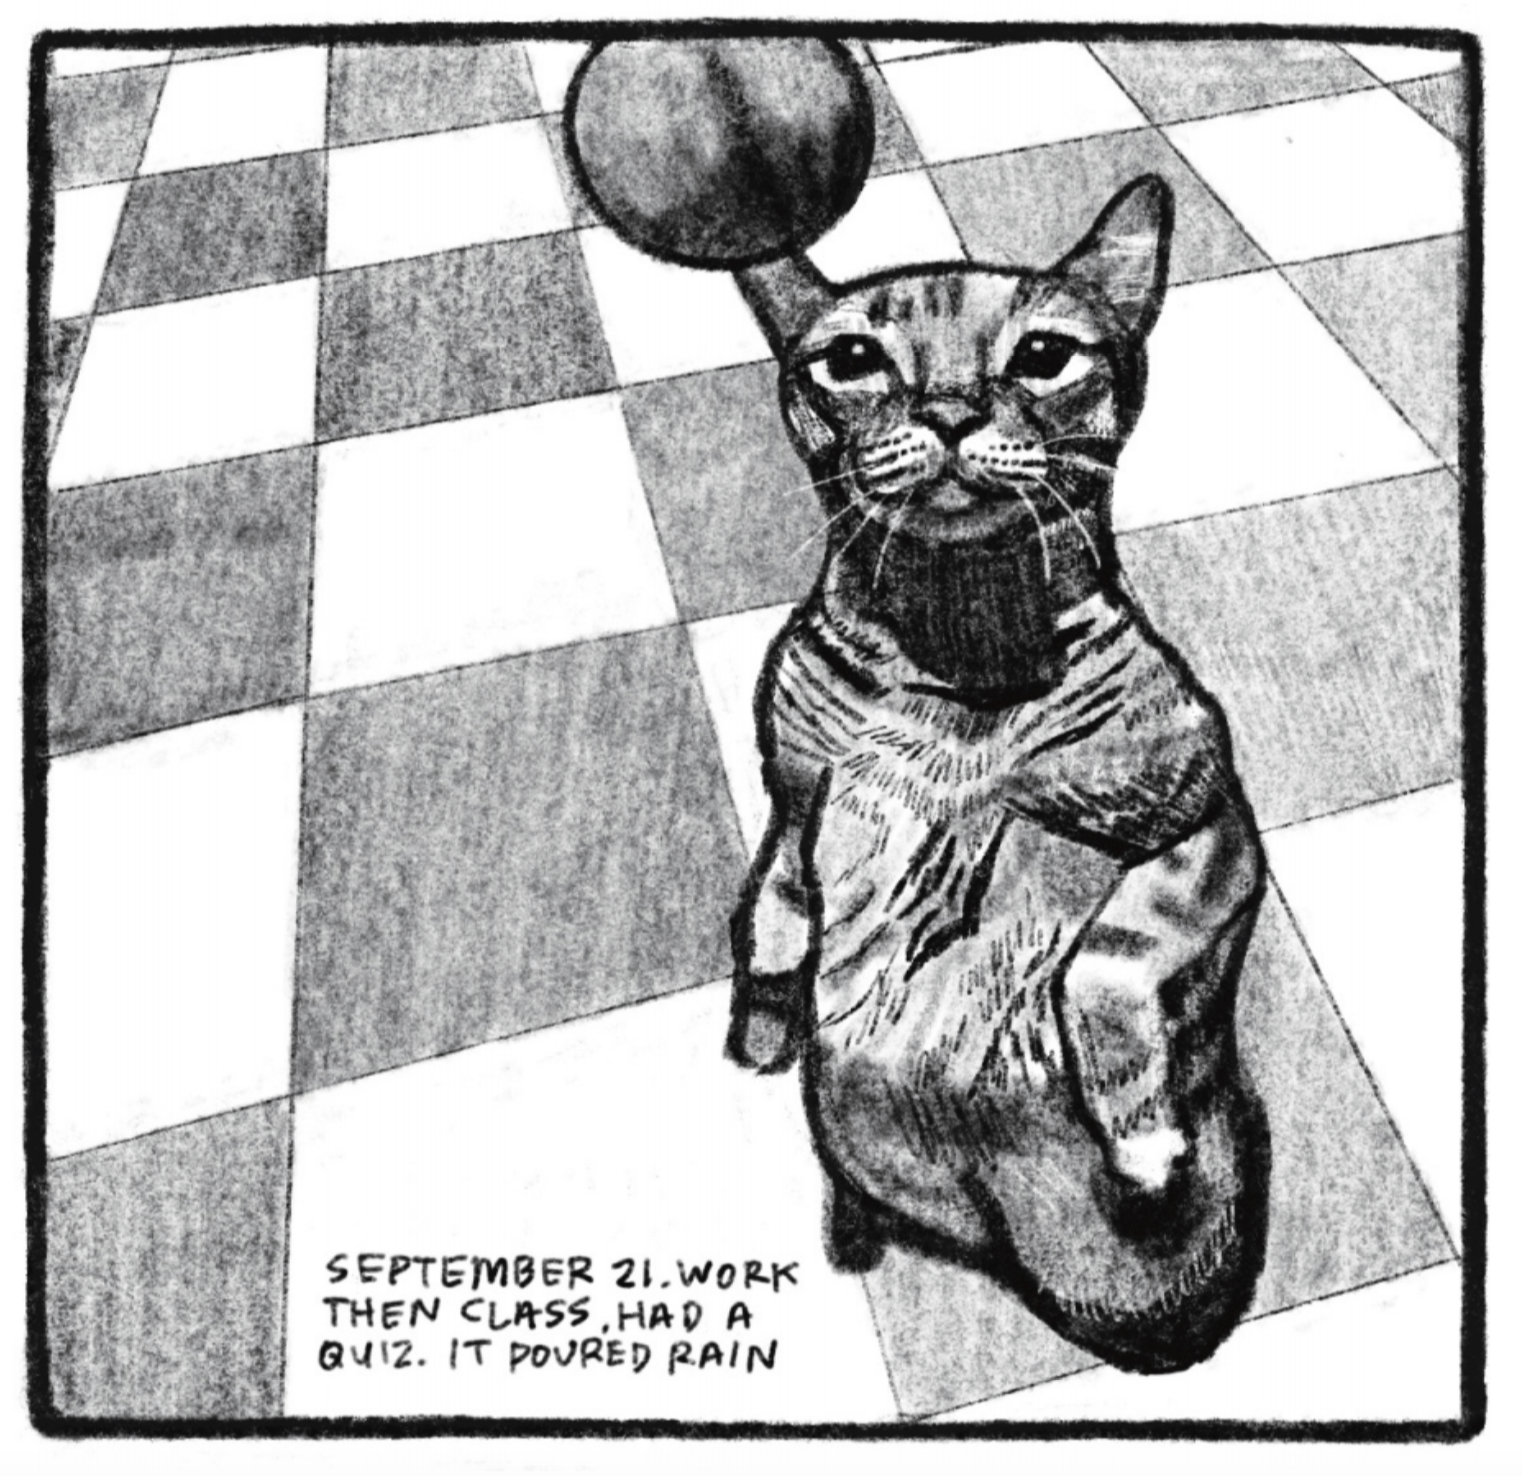 Tonks the cat is standing on his hind legs, looking up with dilated pupils at a toy ball hanging above his head. He is standing on a checkered tile floor. â€œSeptember 21. Work then class. Had a quiz. It poured rain.â€